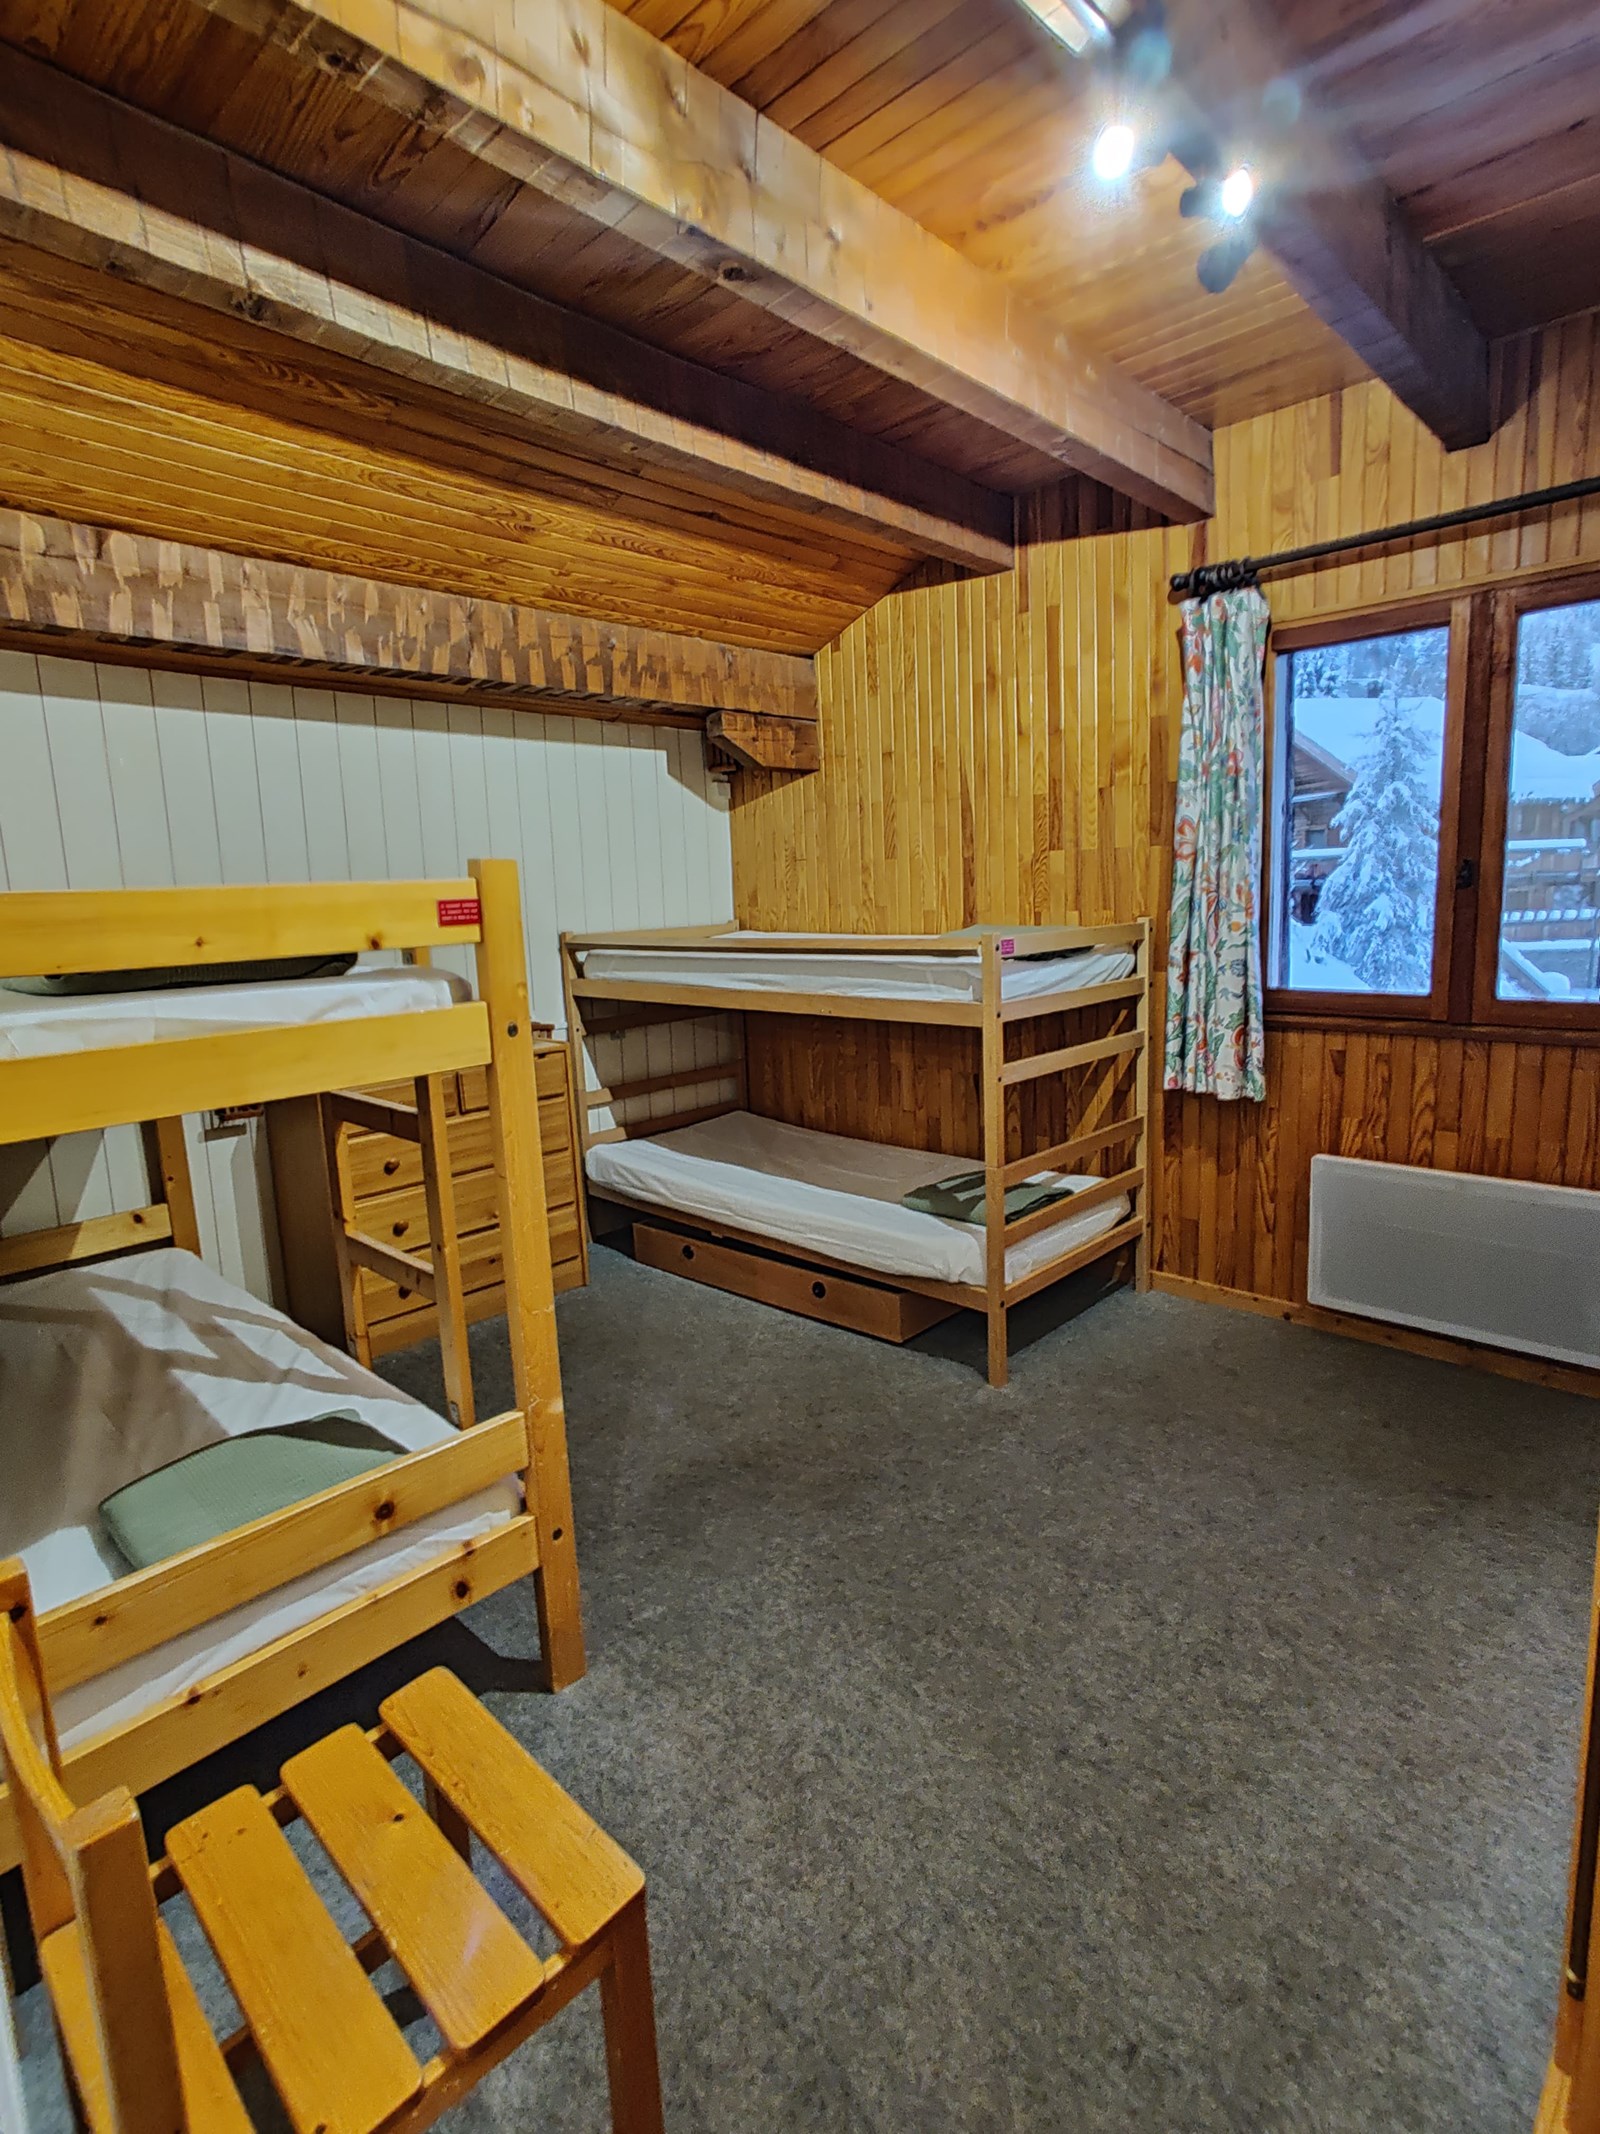 Chalet Chabrieres 267 - Vars